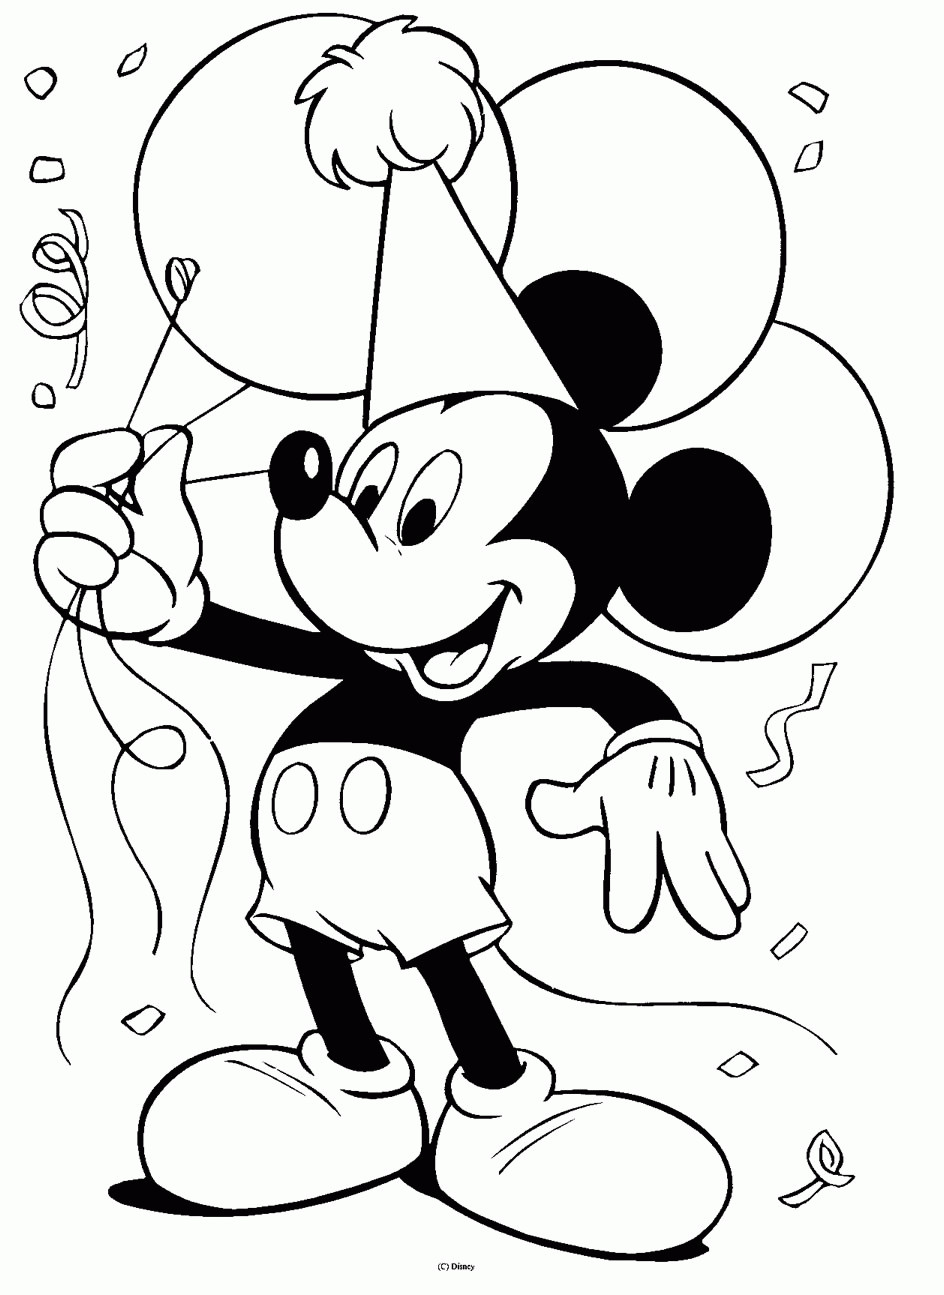 Printable Disney Coloring Pages
 DISNEY COLORING PAGES